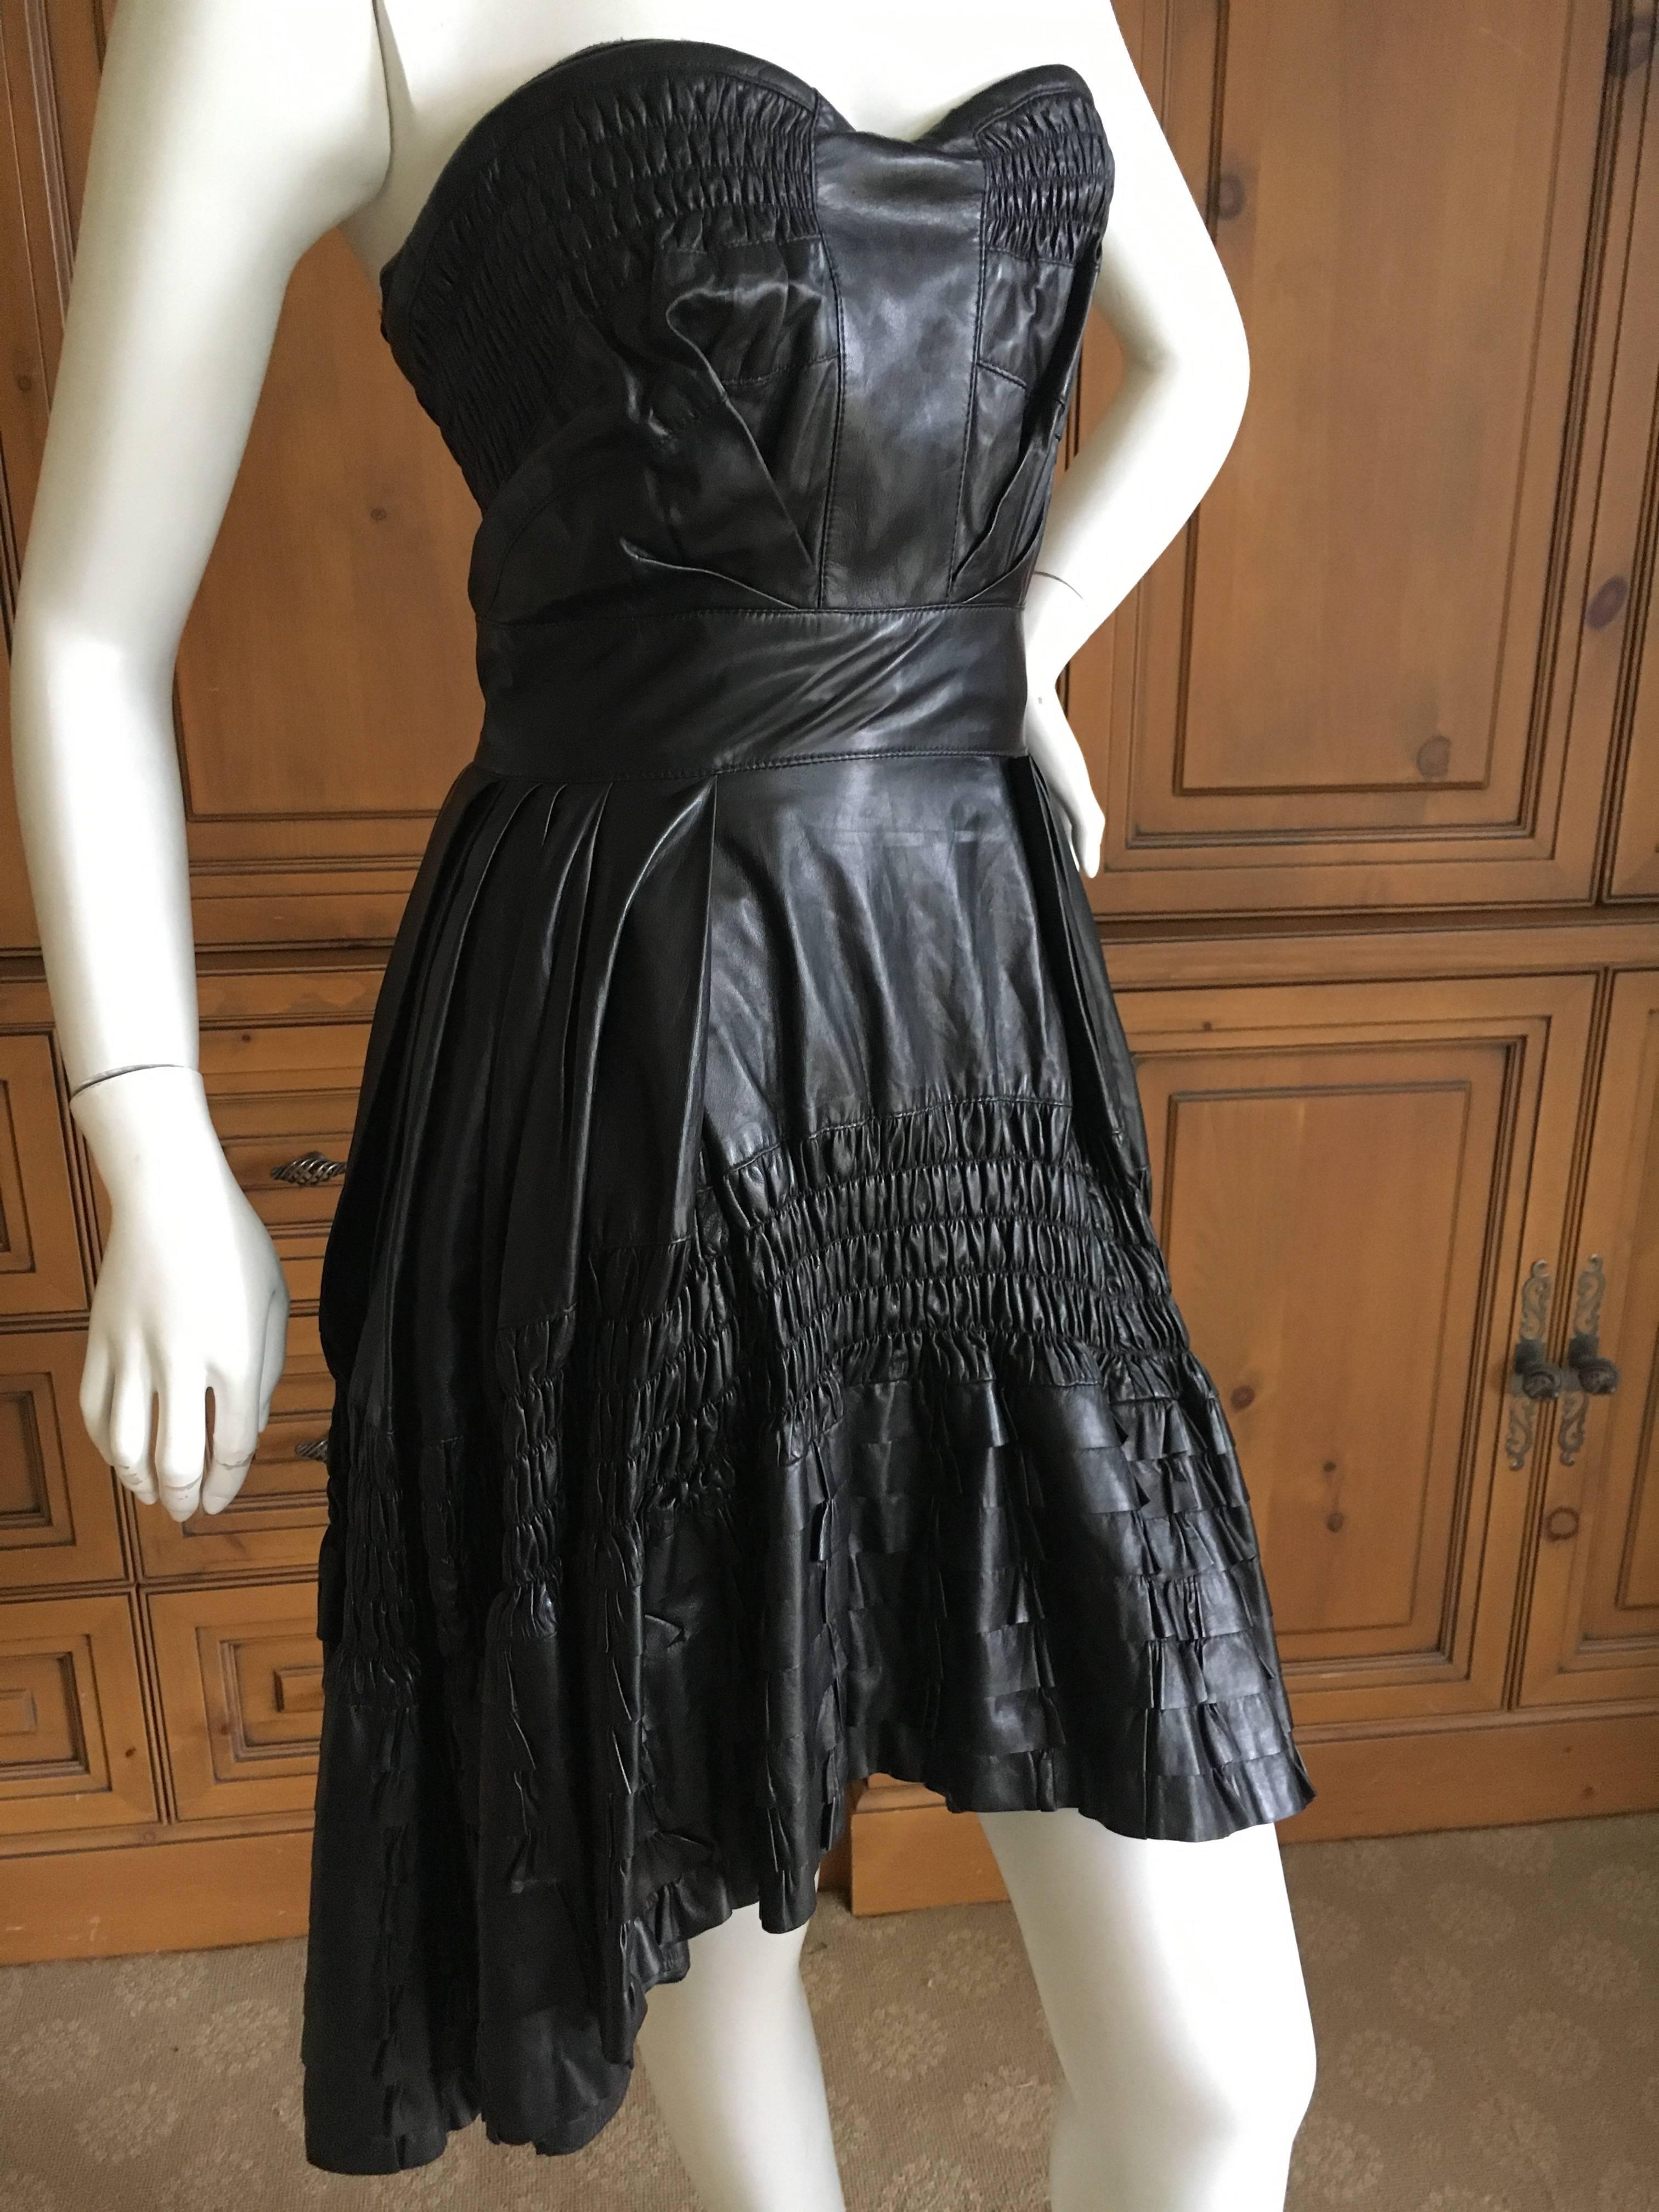 Christian Dior by John Galliano Fall 2010 Black Leather Pleated Ruffle Dress In Excellent Condition For Sale In Cloverdale, CA